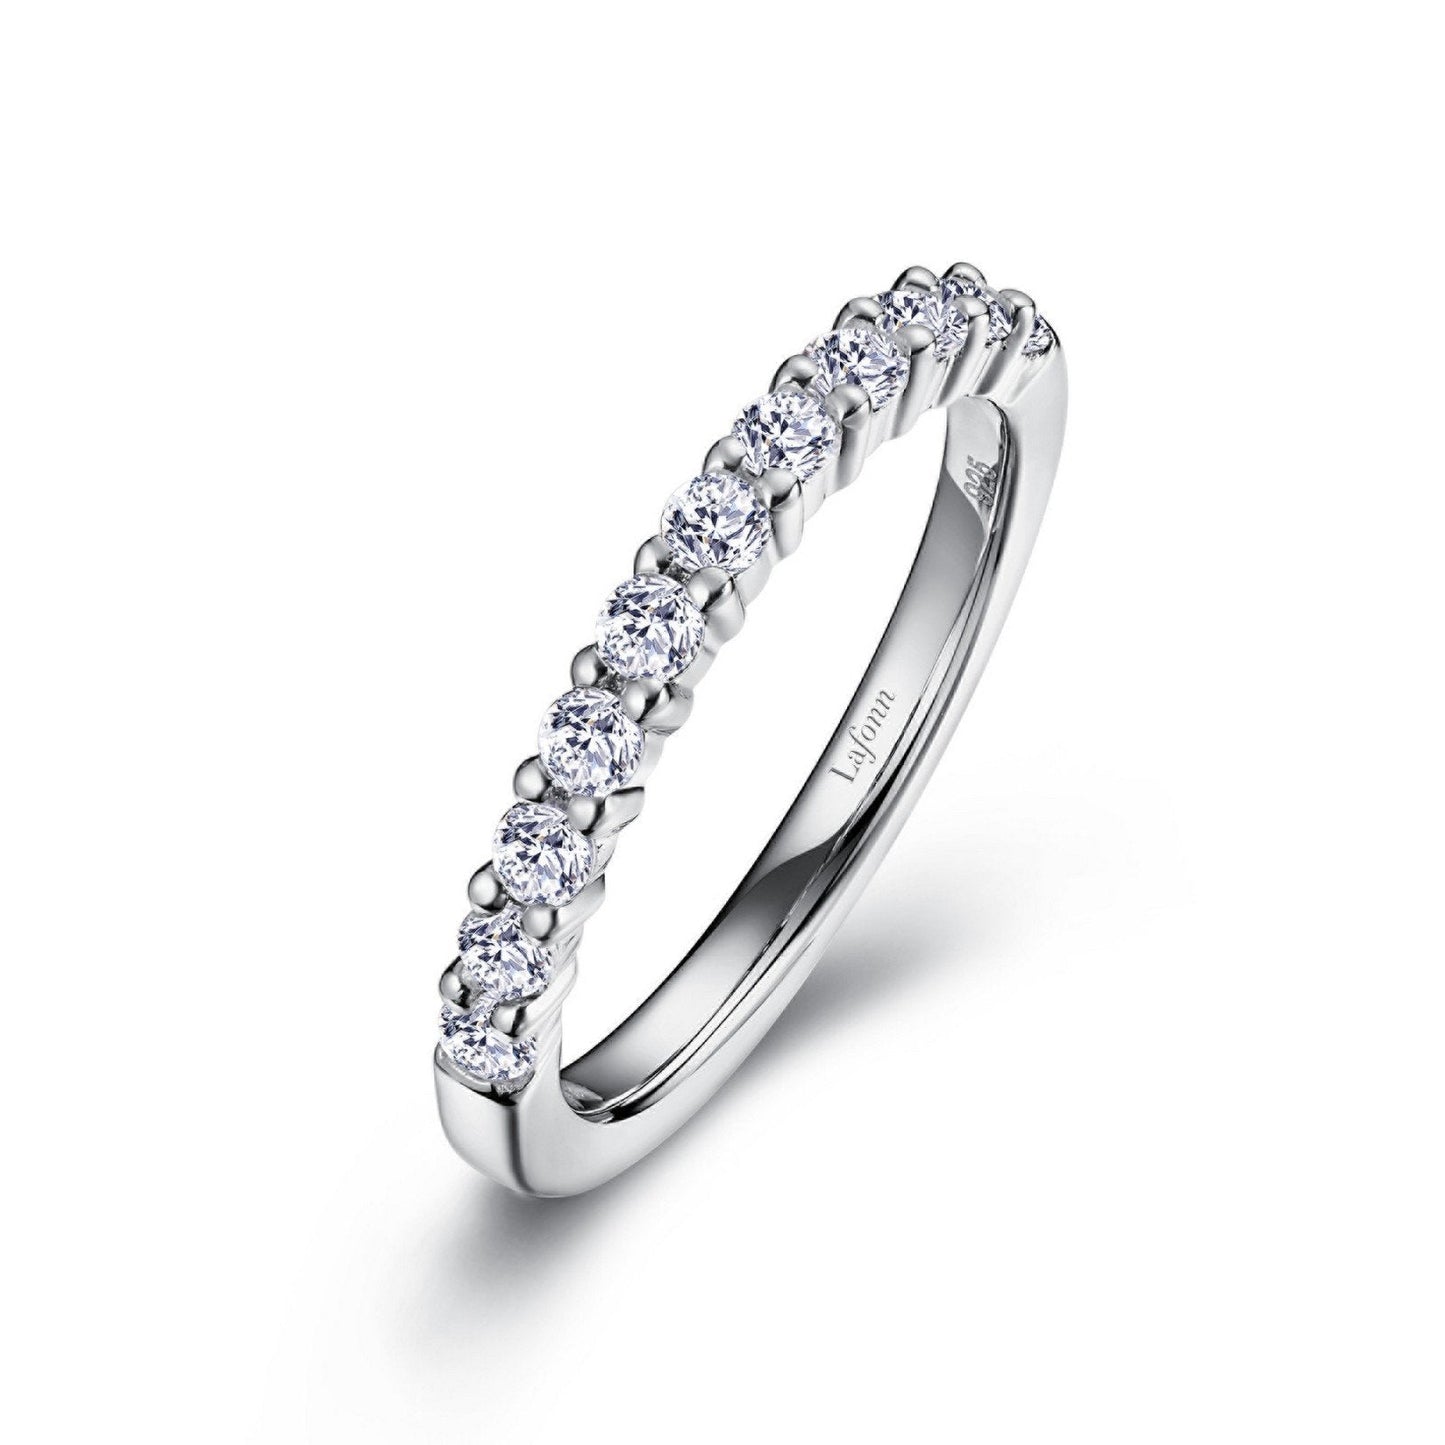 Lafonn 0.50 CTW Half-Eternity Band Simulated Diamond RINGS Size 10 Platinum 0.5 CTS Approx. 2.3mm (W)